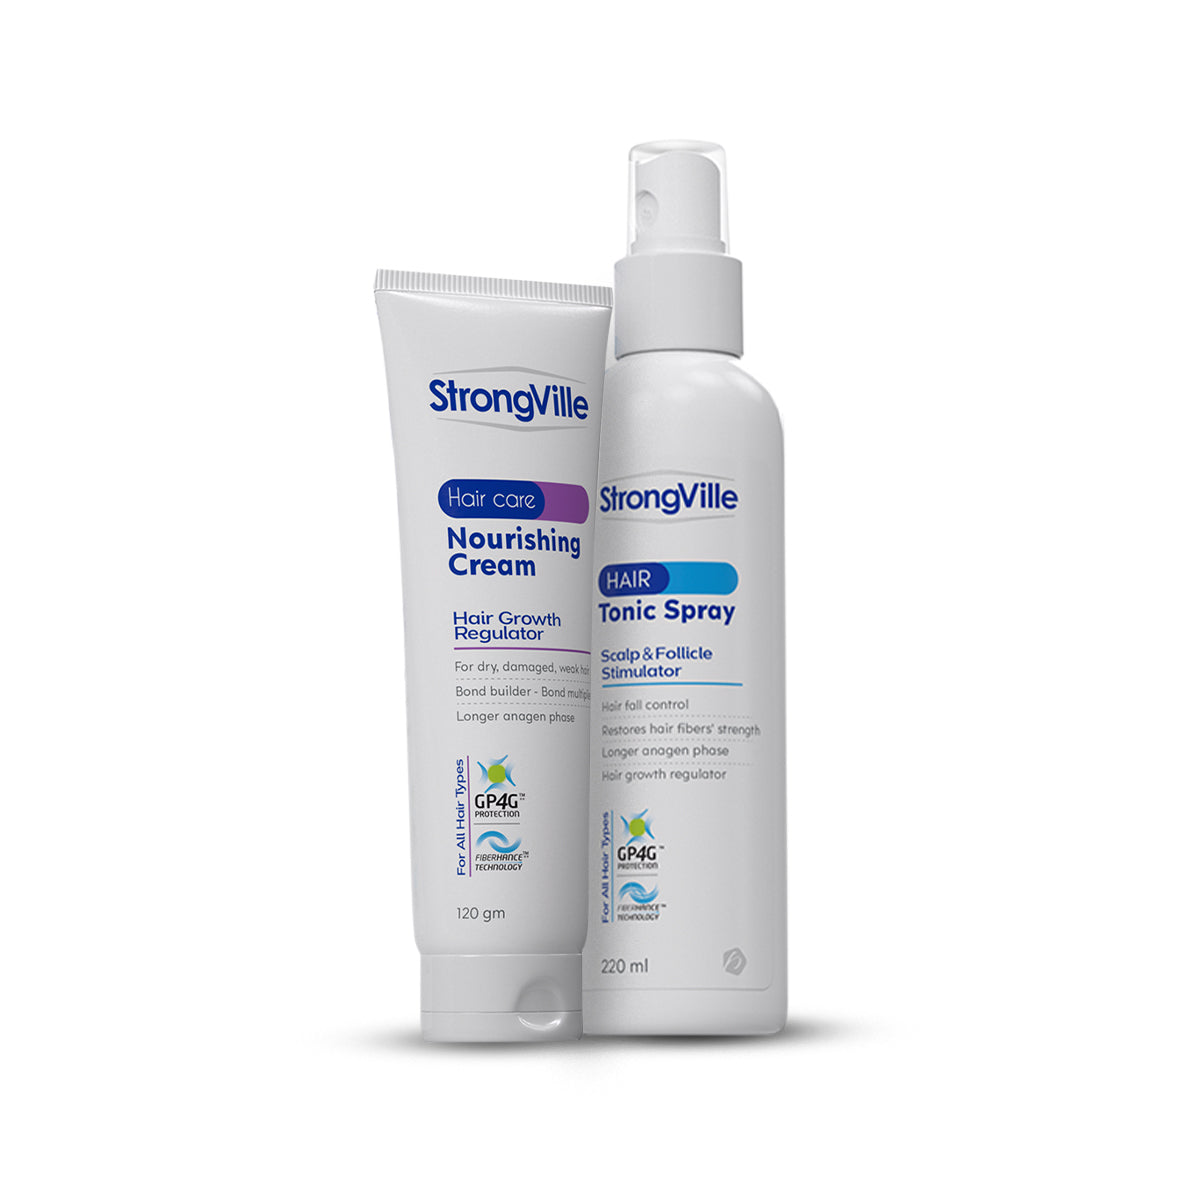 Strongville Spray and Cream Offer